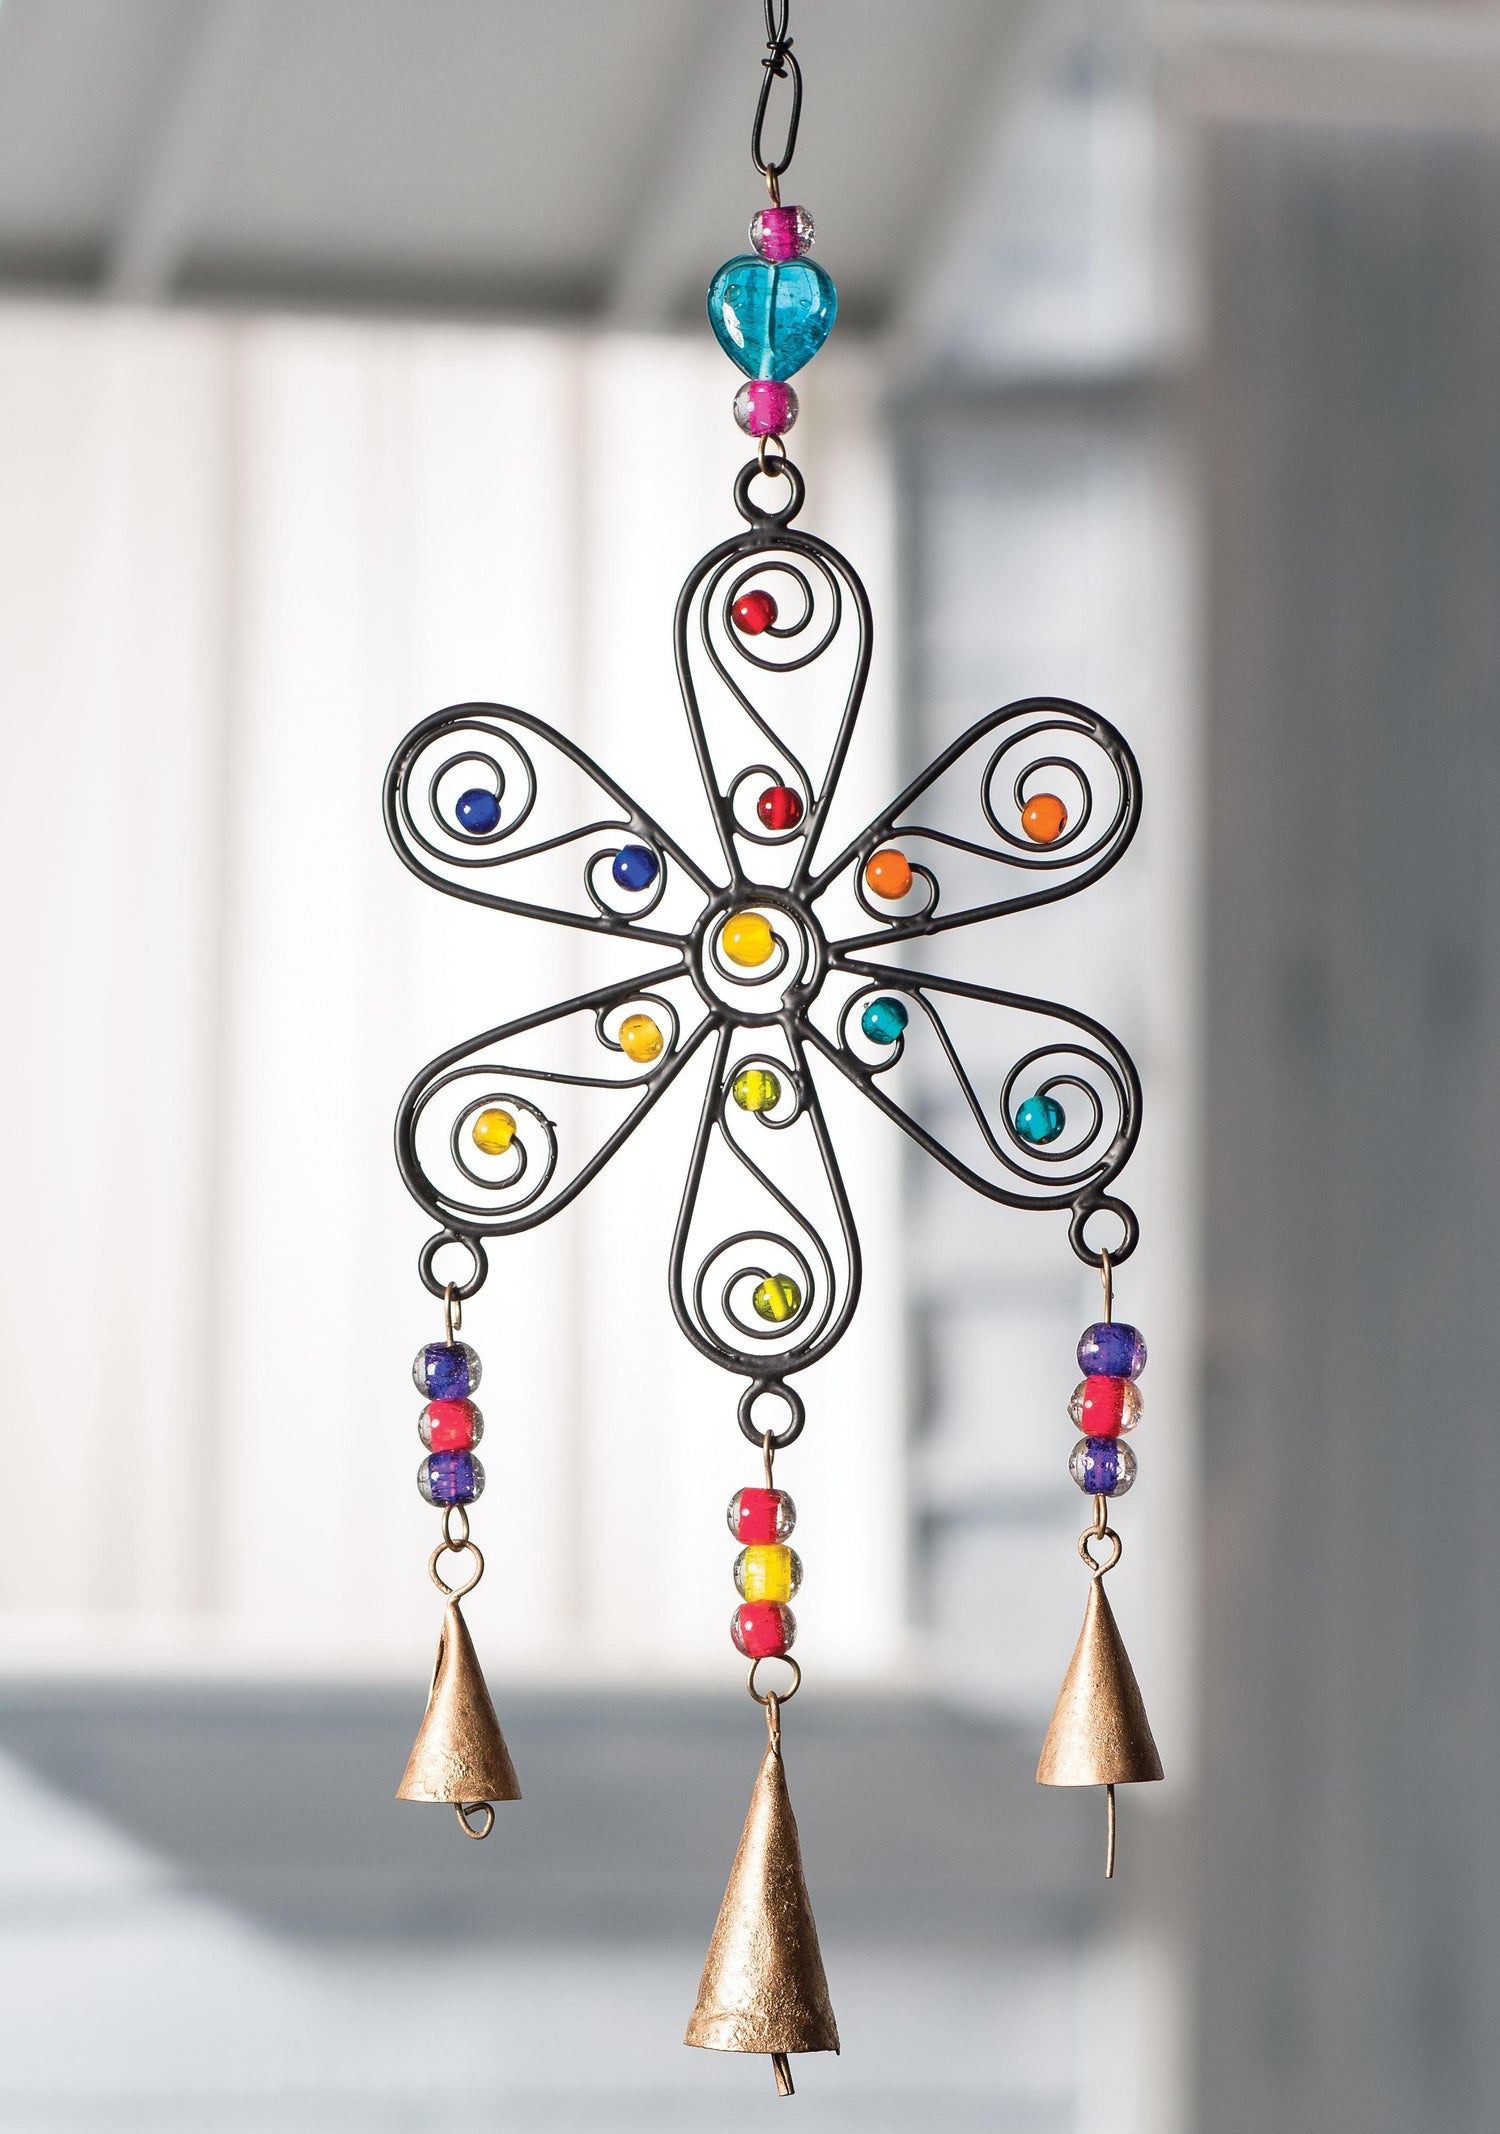 ethical and fair trade artisan made handmade windchime and suncatchers hand crafted with beads and bells for festive season